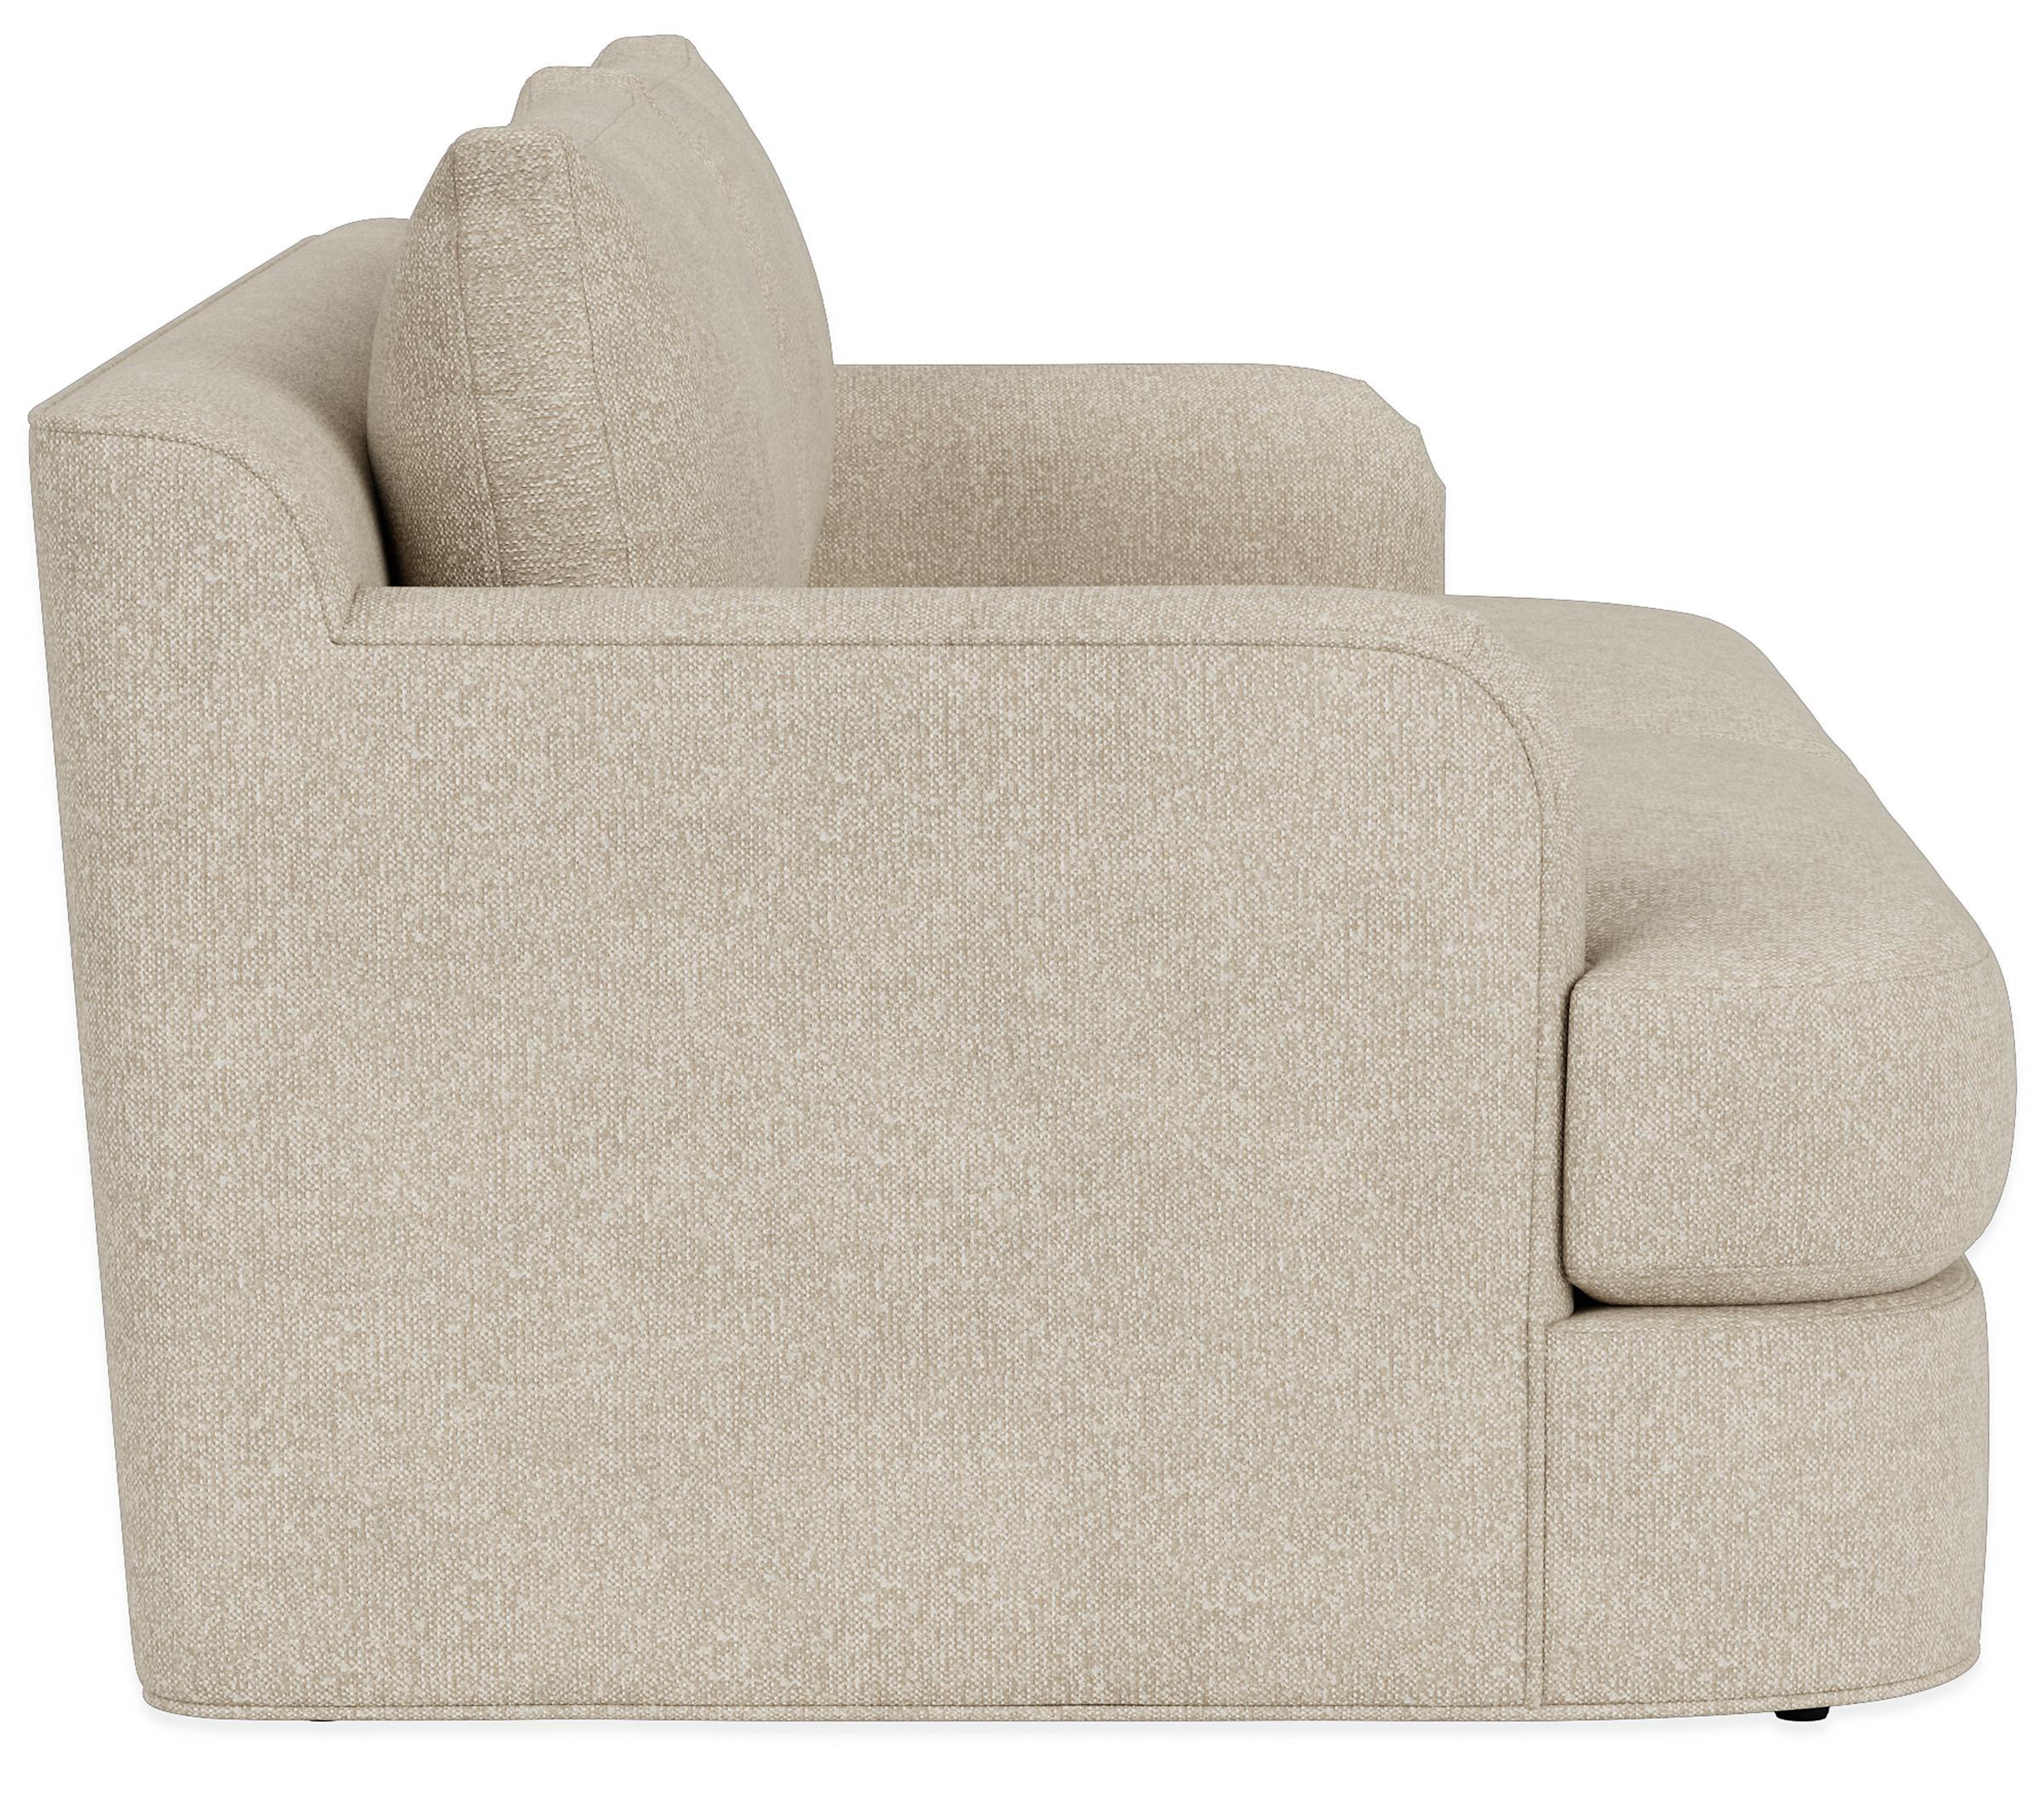 side view of Sonja 81" Sofa in Conley Natural.